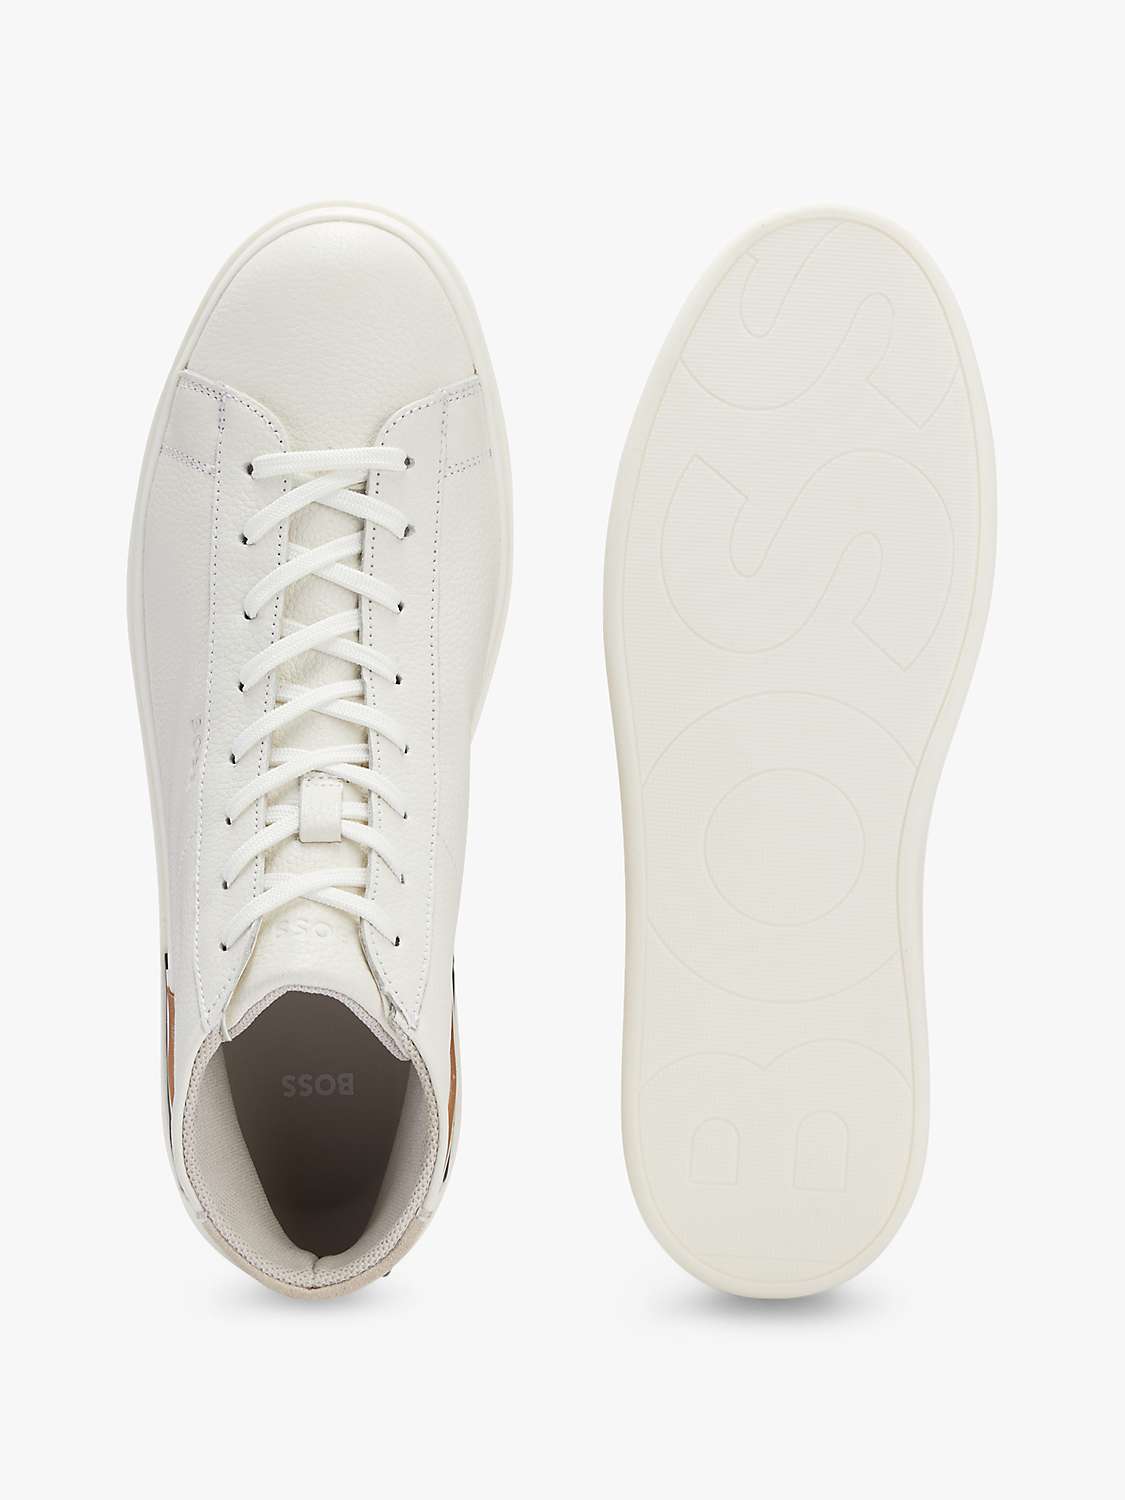 Buy BOSS Clint Hito High-Top Trainers Online at johnlewis.com